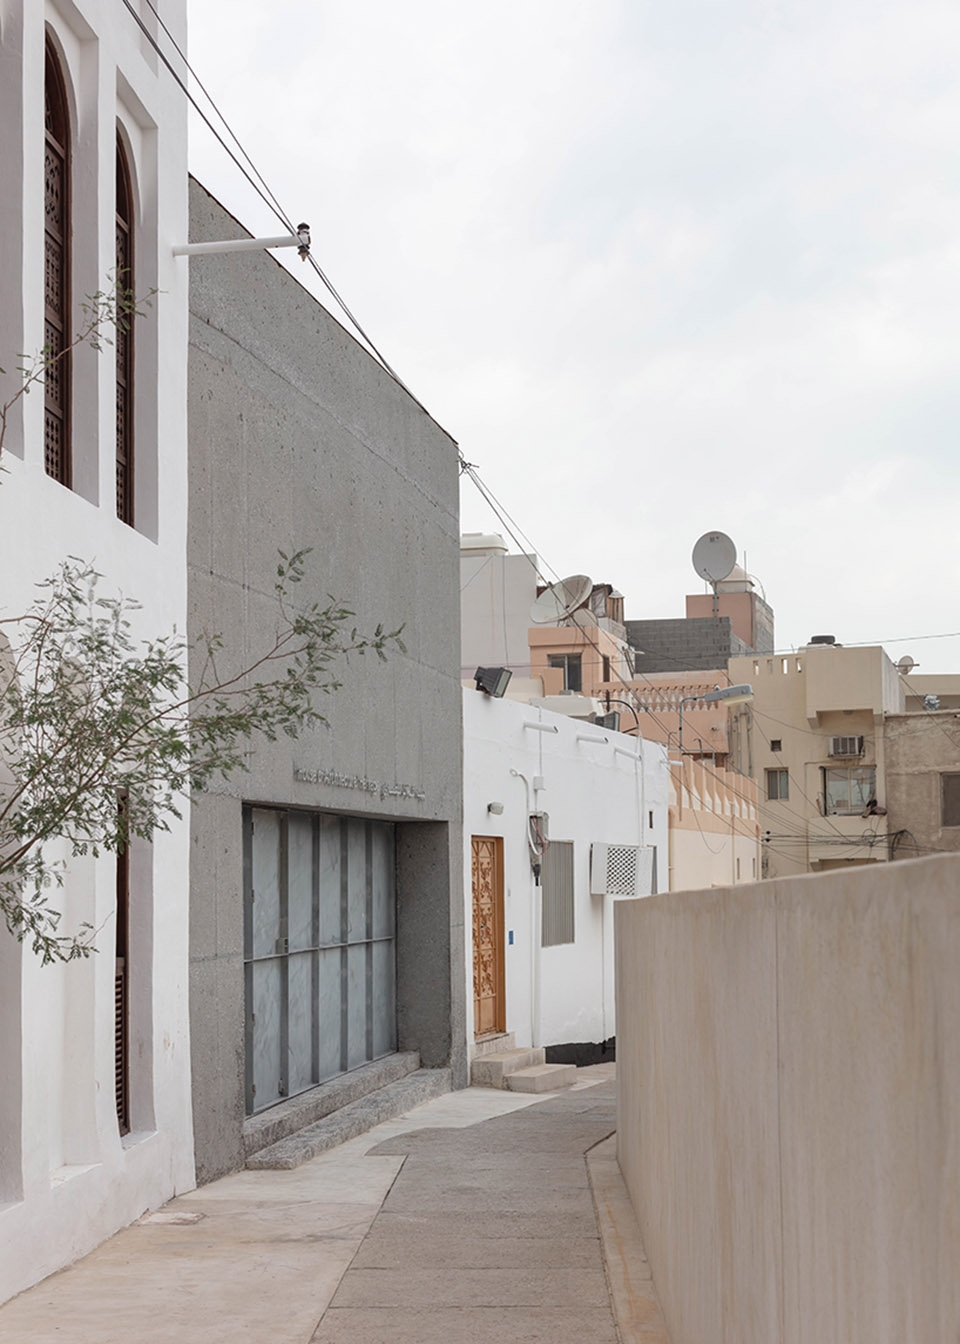 002-house-of-architectural-heritage-by-noura-al-sayeh-leopold-banchini-architects-960x1344.jpg